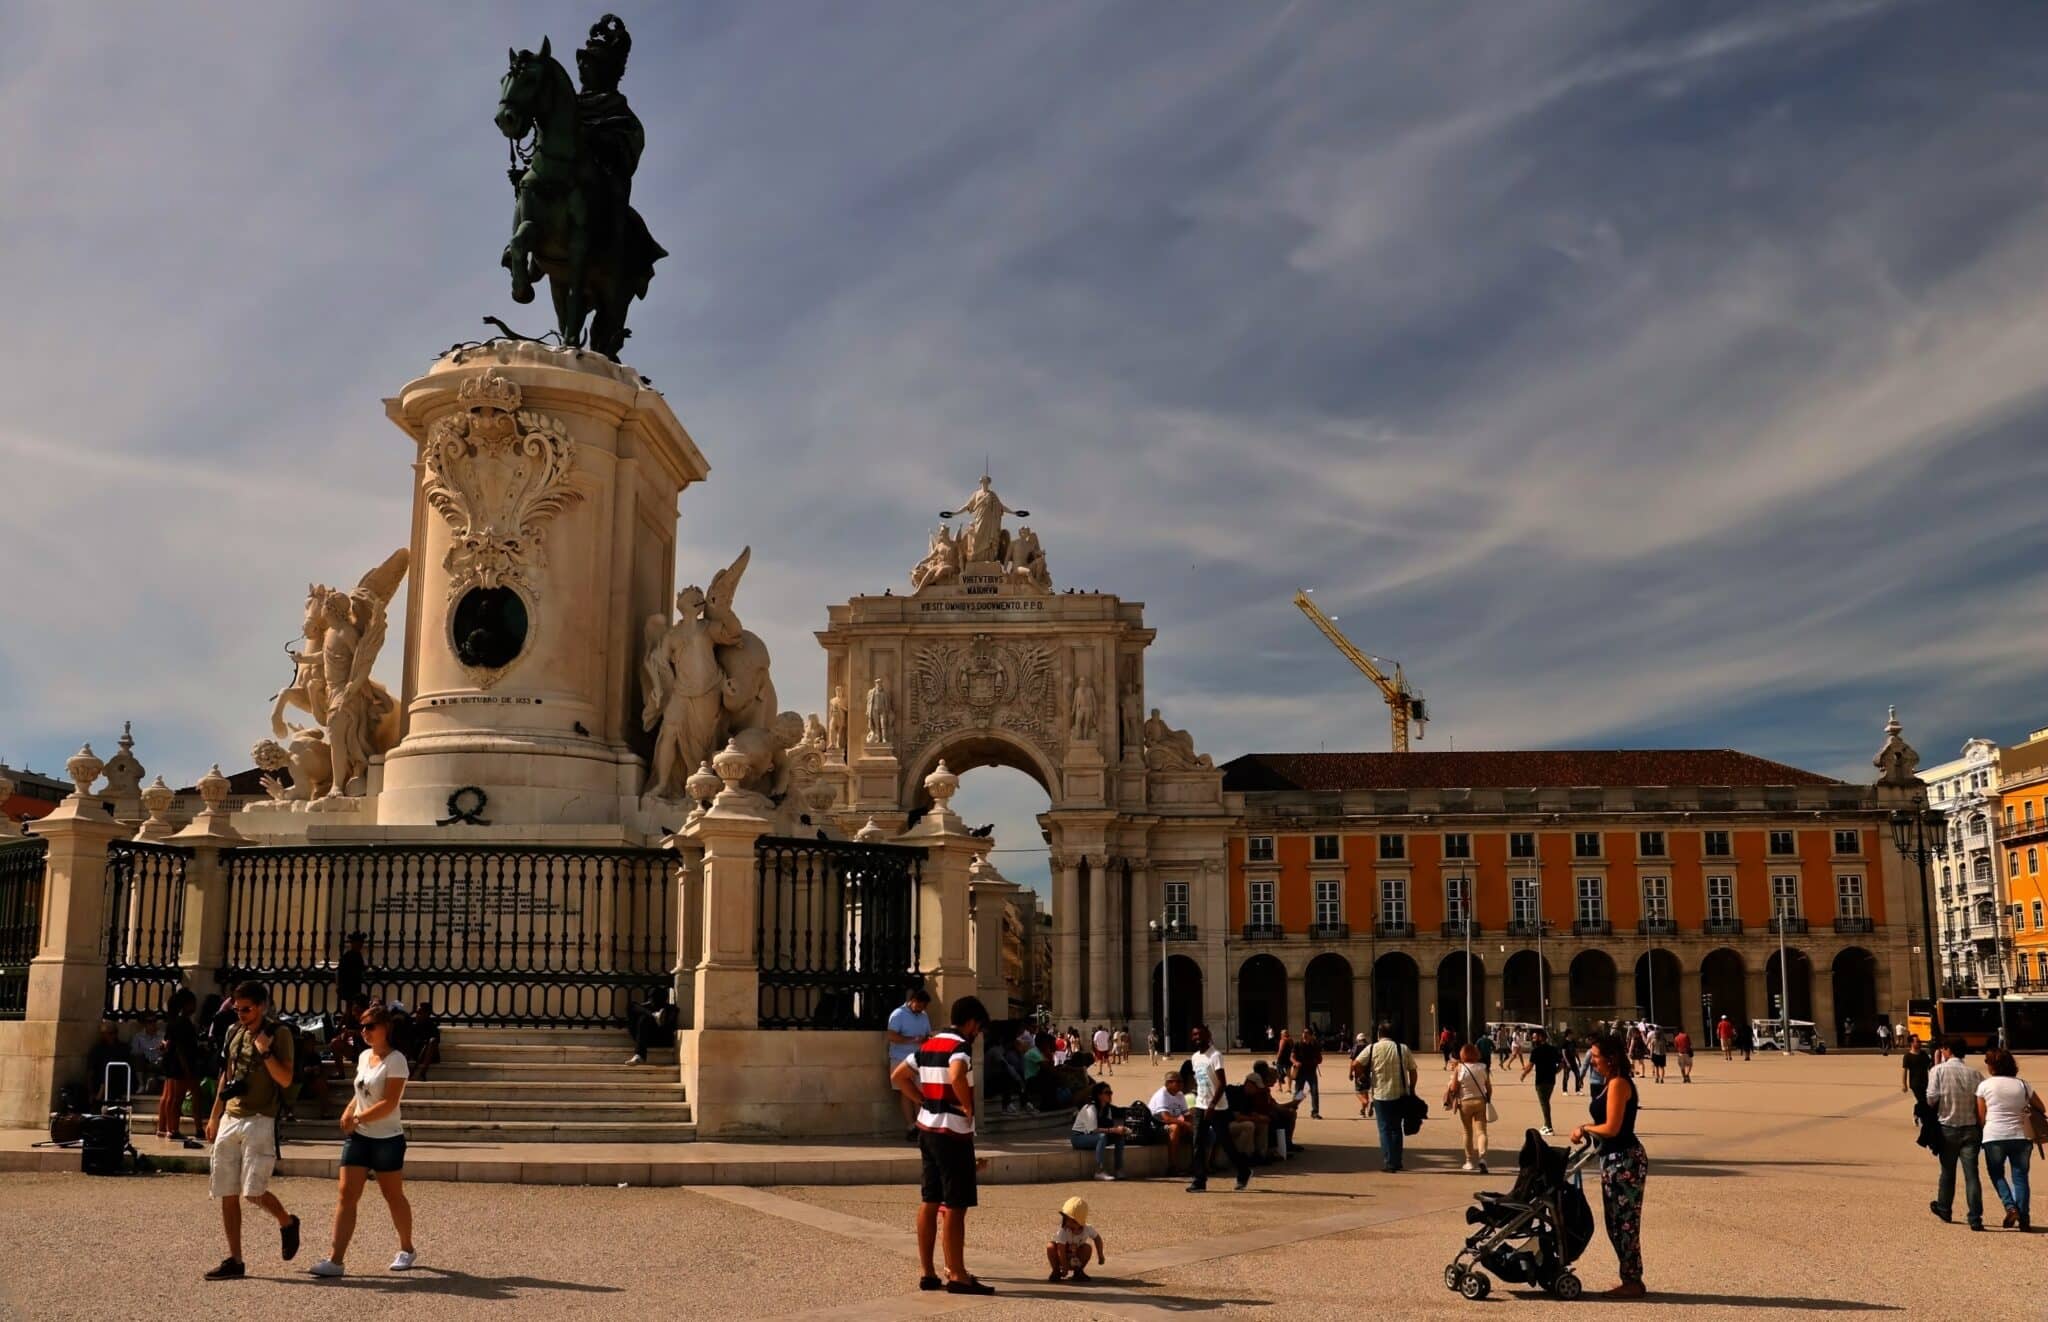 Praça do Comercio with statue of King Jose 1 in foreground